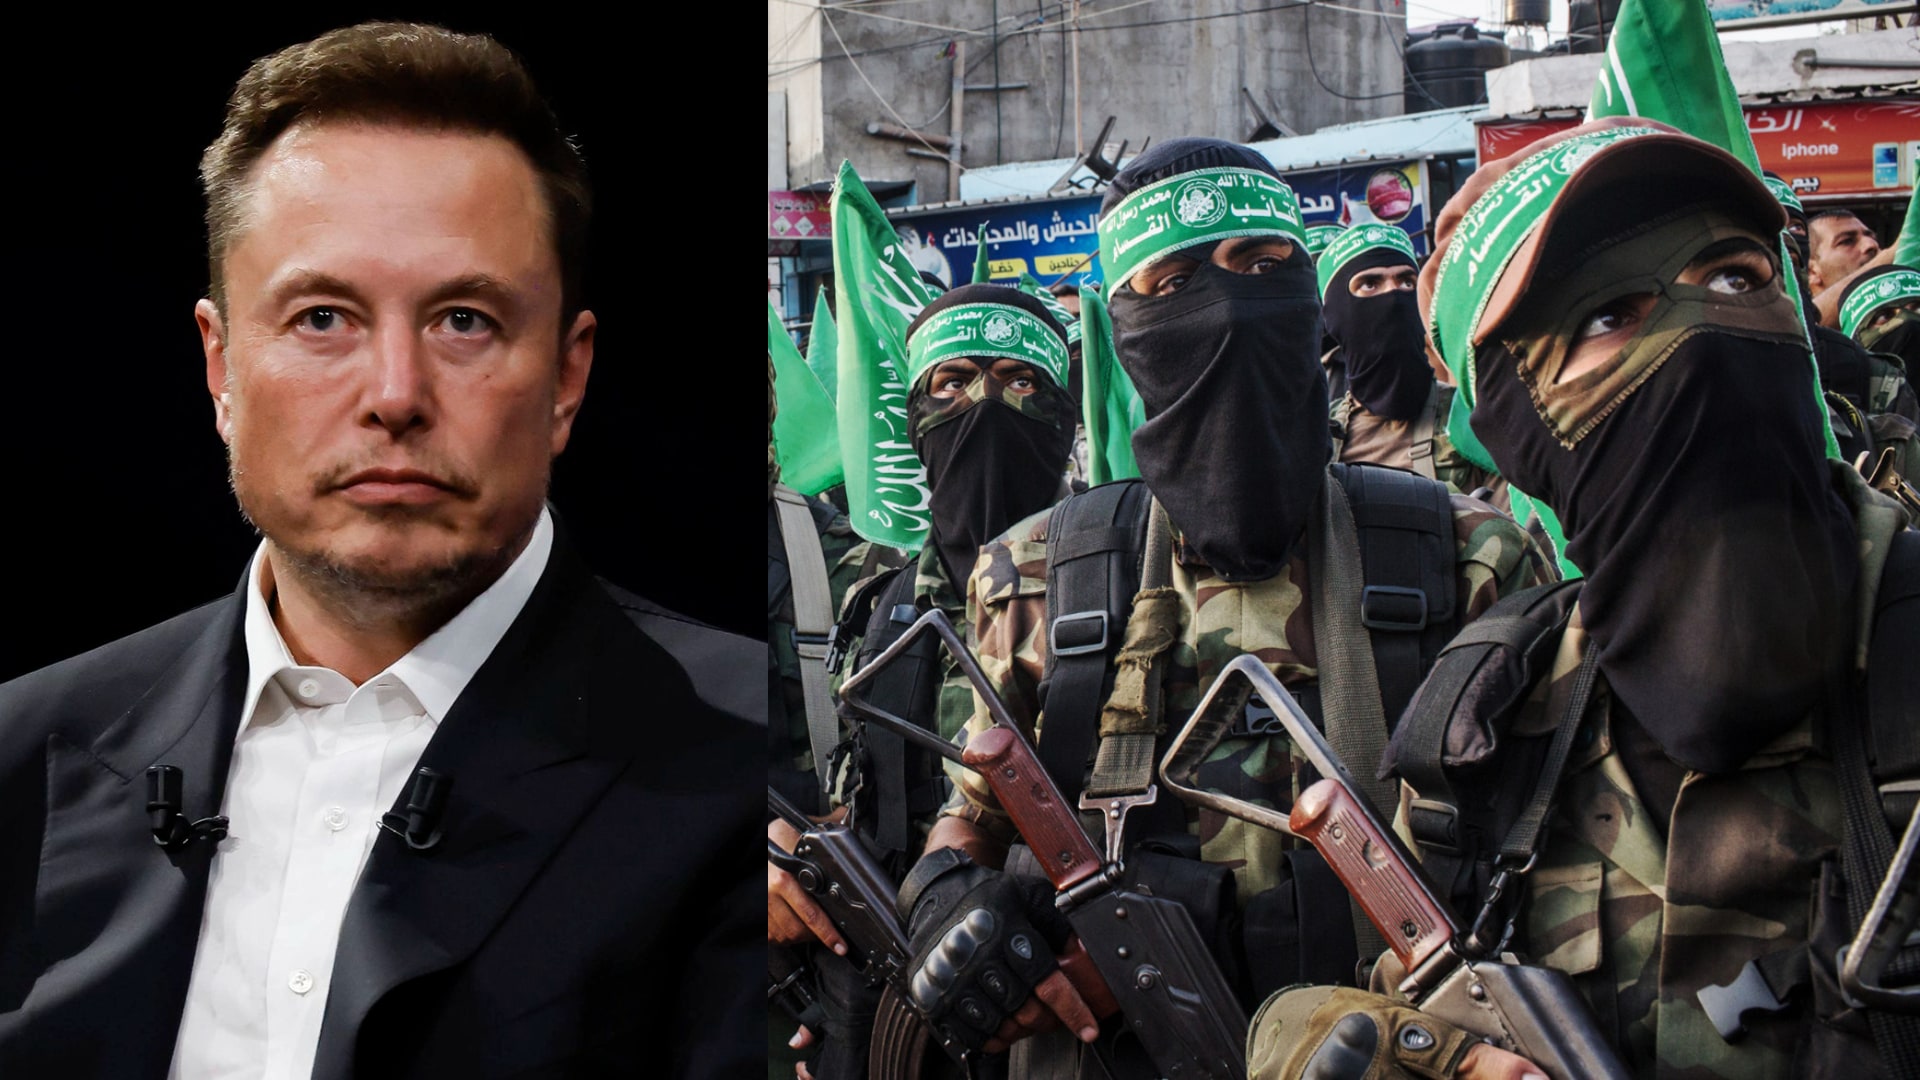 Elon Musk’s X has deleted hundreds of Hamas-affiliated accounts since attack, says CEO Yaccarino